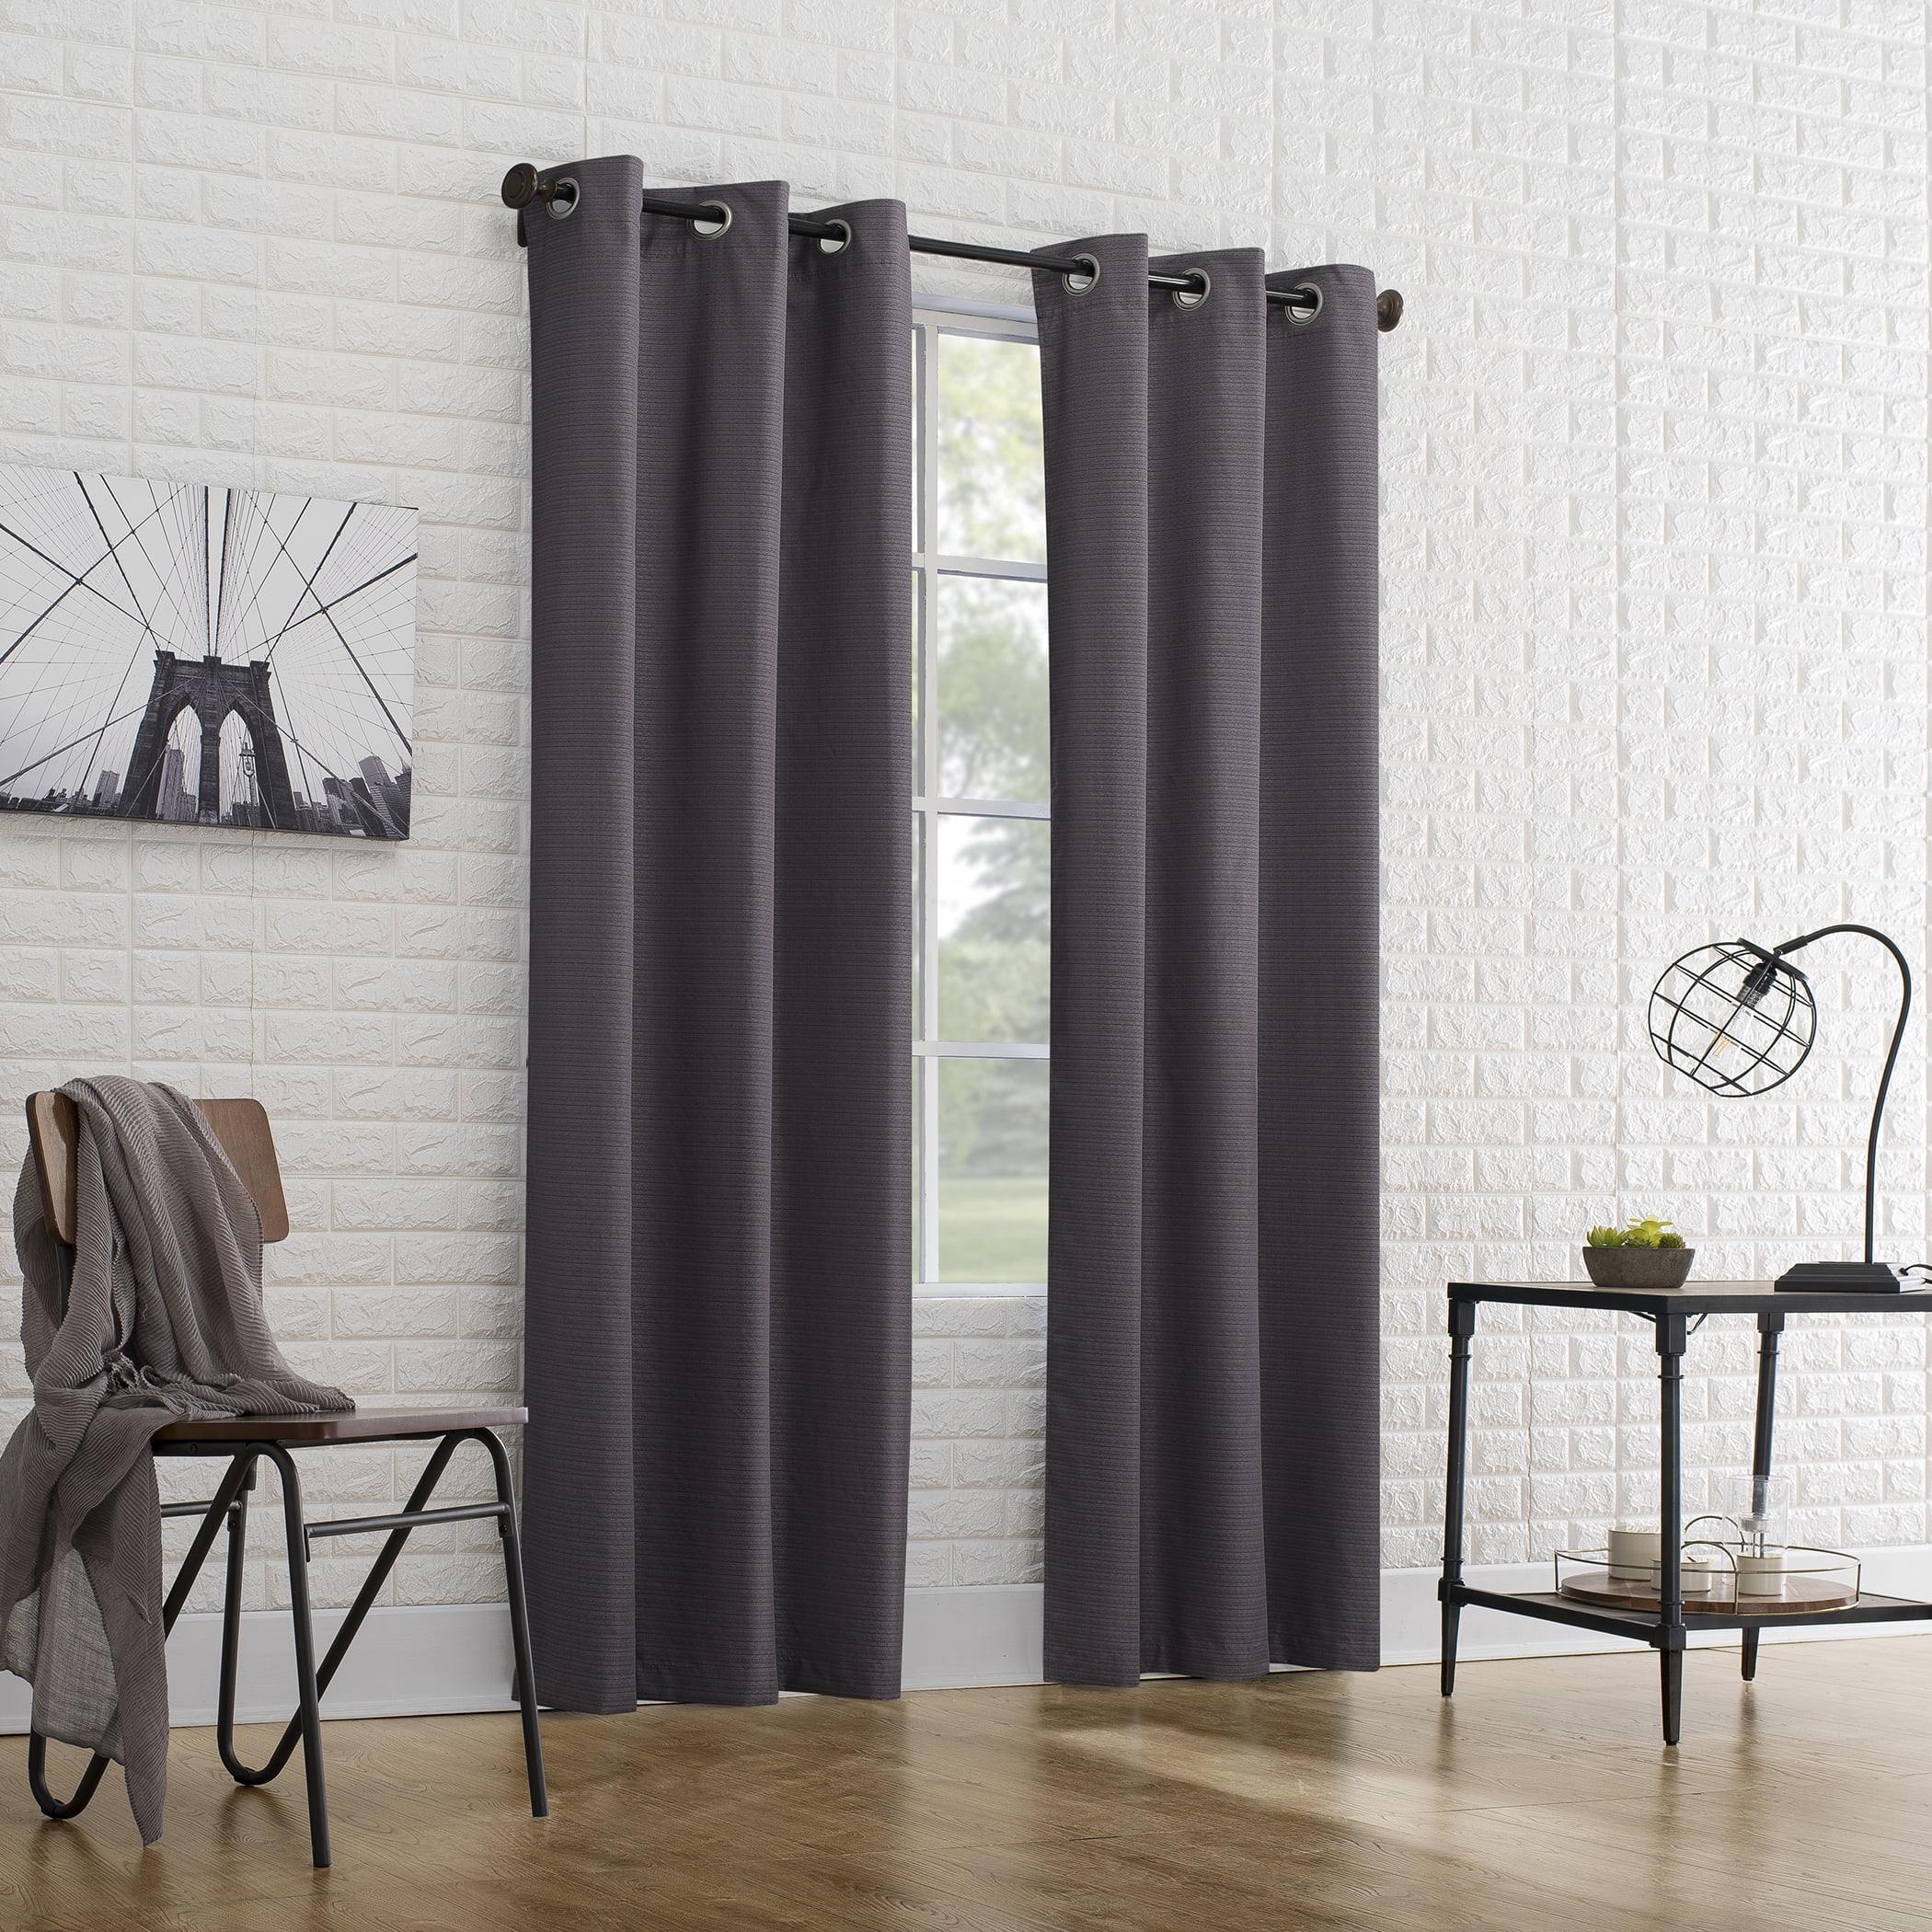 PAIRS OF DARK NAVY BLUE TEXTURED THERMAL EYELET BLOCK OUT LINED LIGHT CURTAINS 